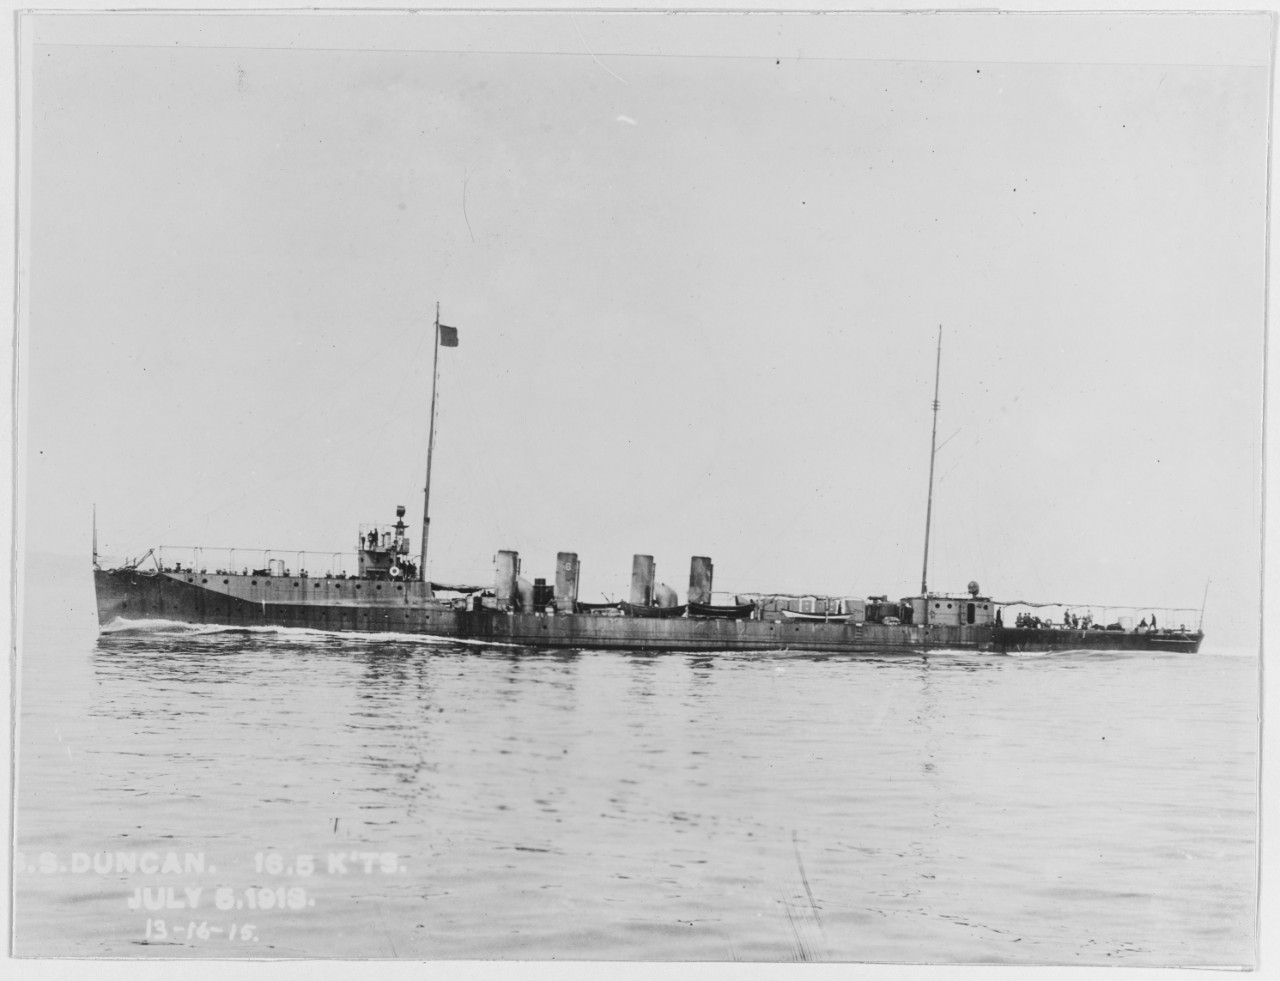 Duncan, prior to installation of armament, making 16.5 knots while running trials, 5 July 1913. (Naval History and Heritage Command Photograph NH 54578)